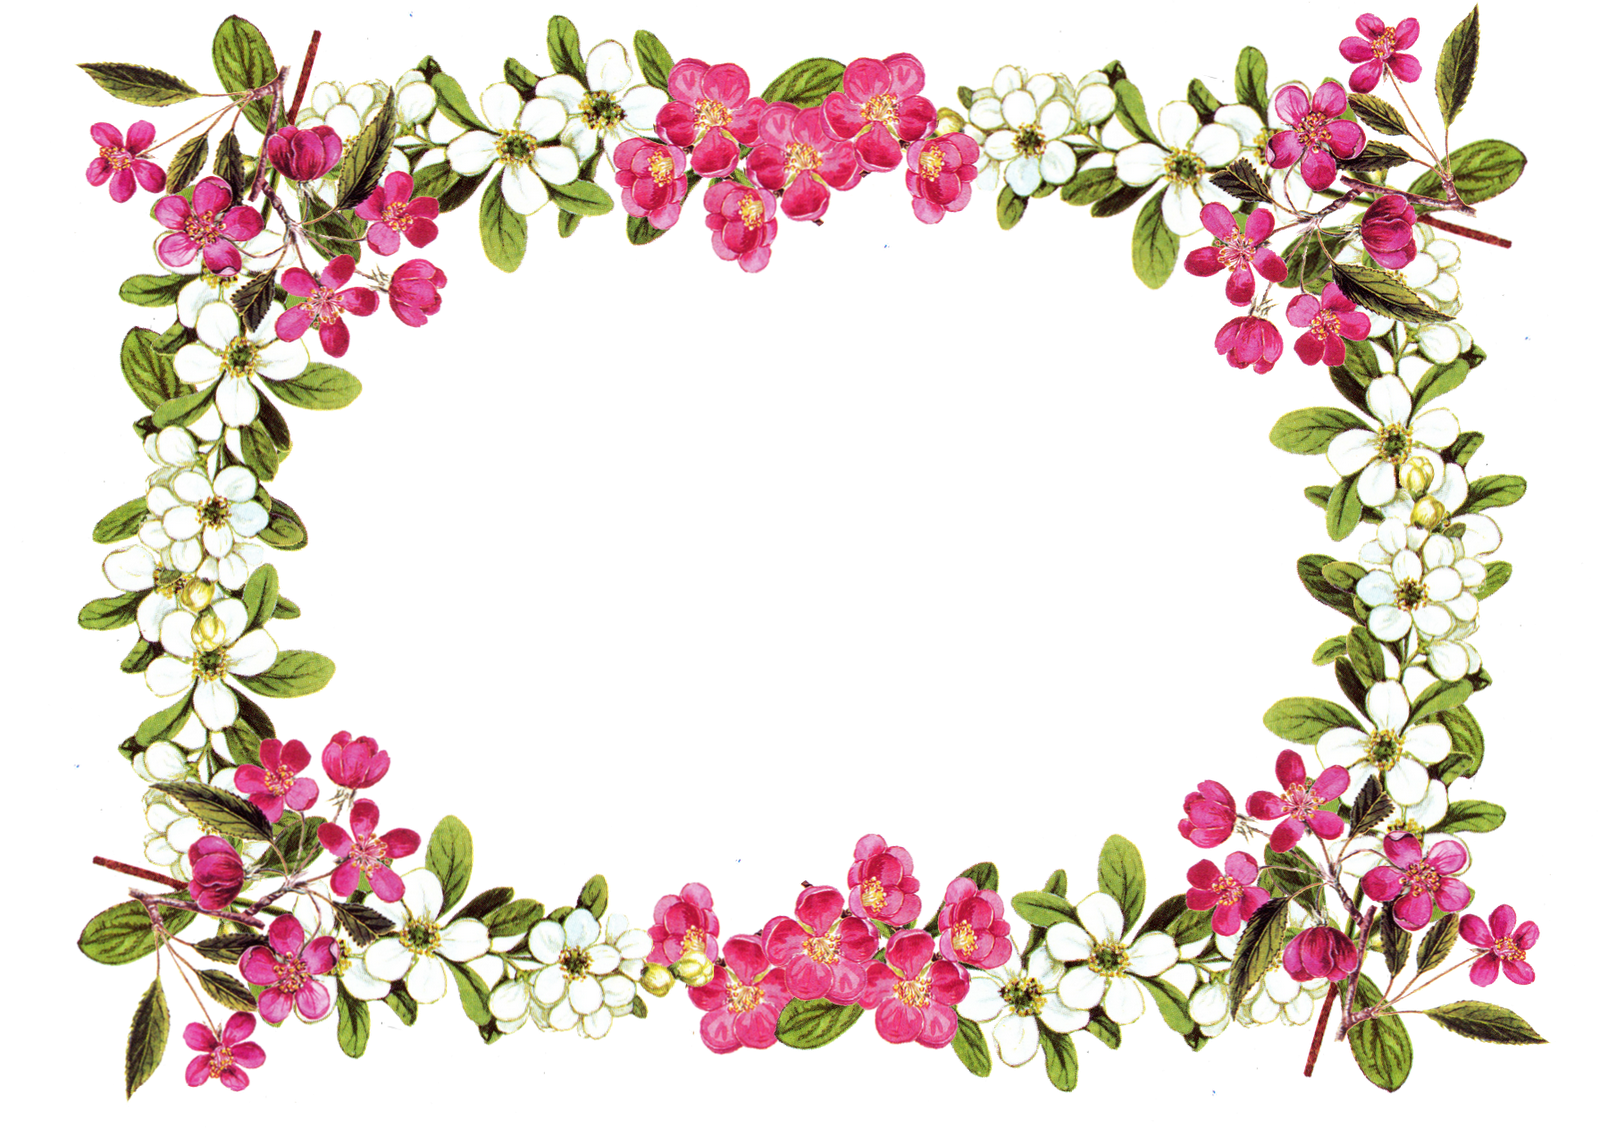 Antique Flower Art PNG Image High Quality PNG Image